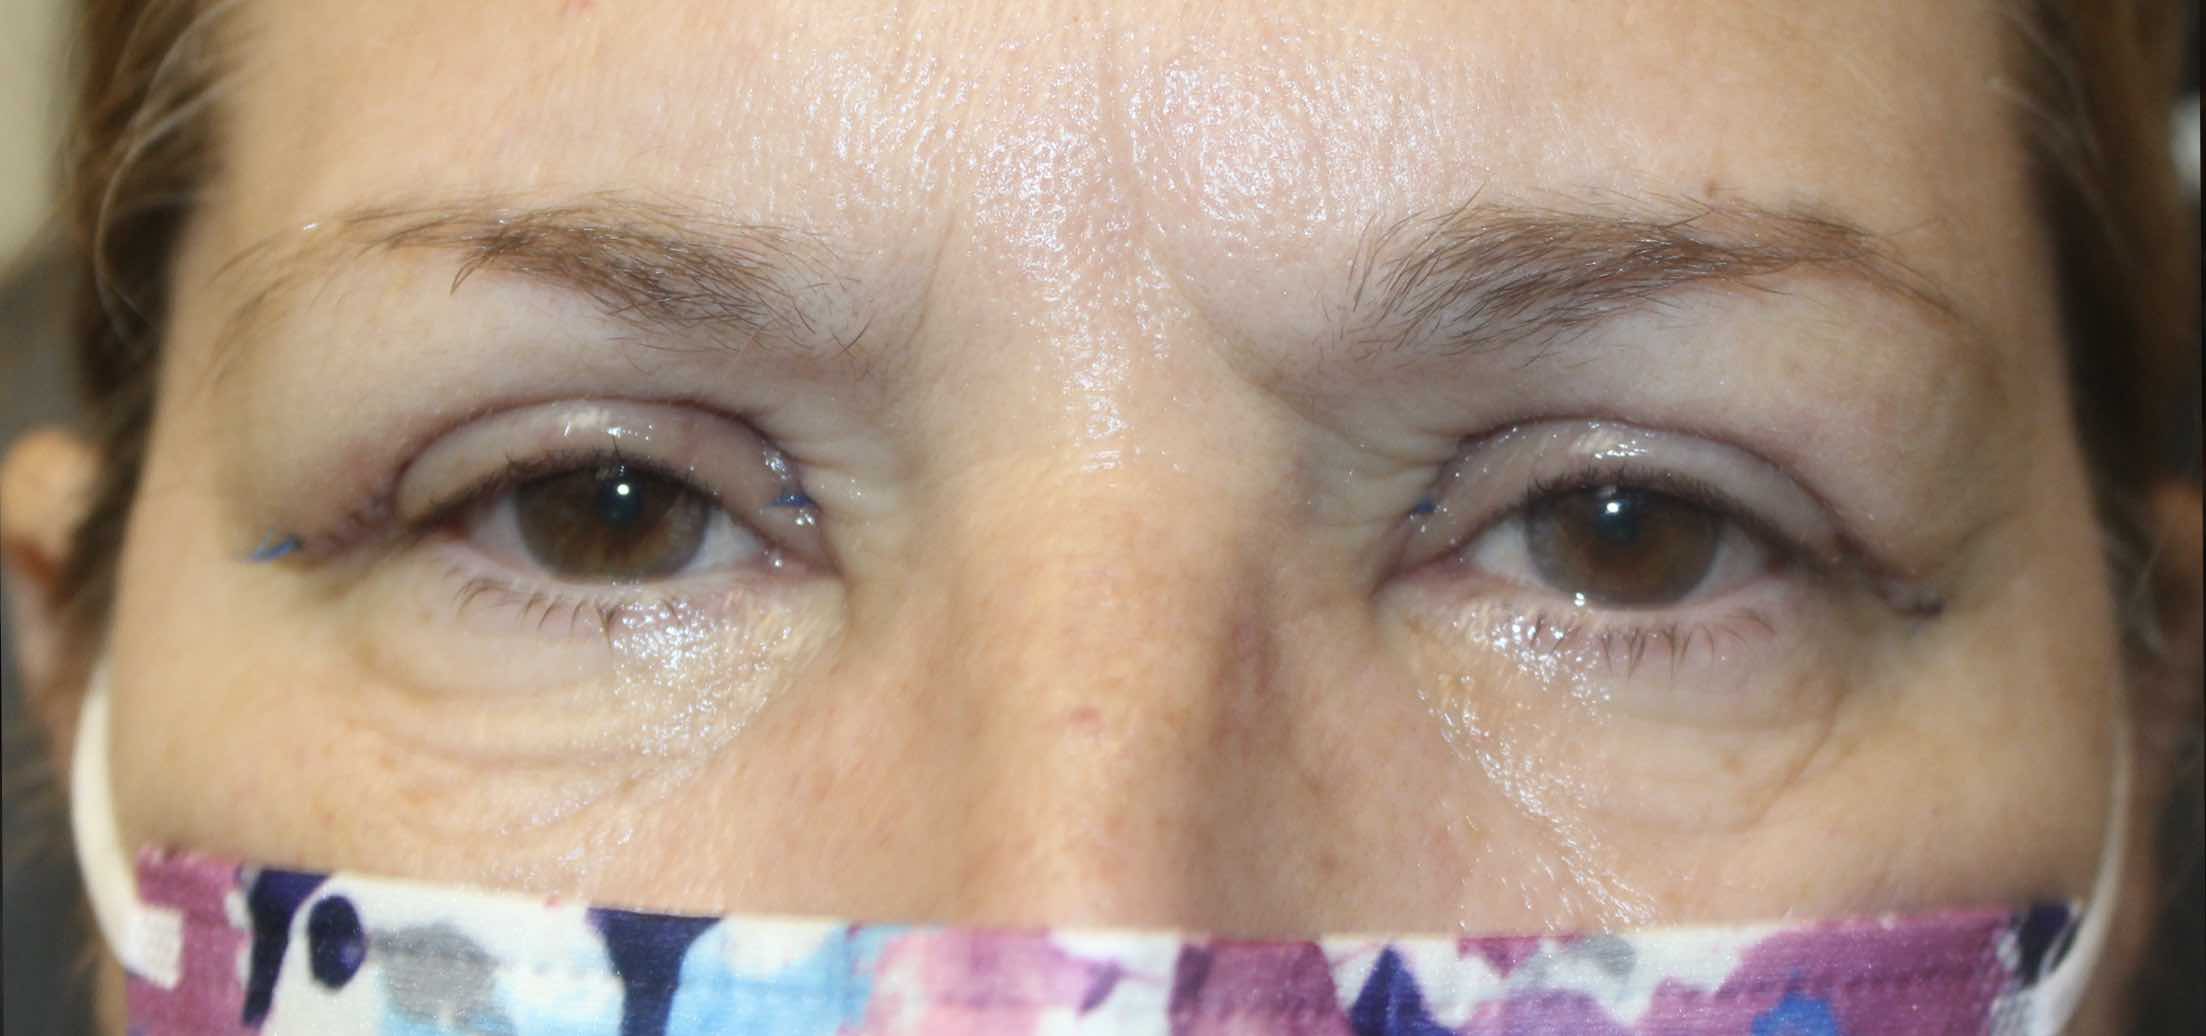 57 year old female patient 1 week after blepharoplasty